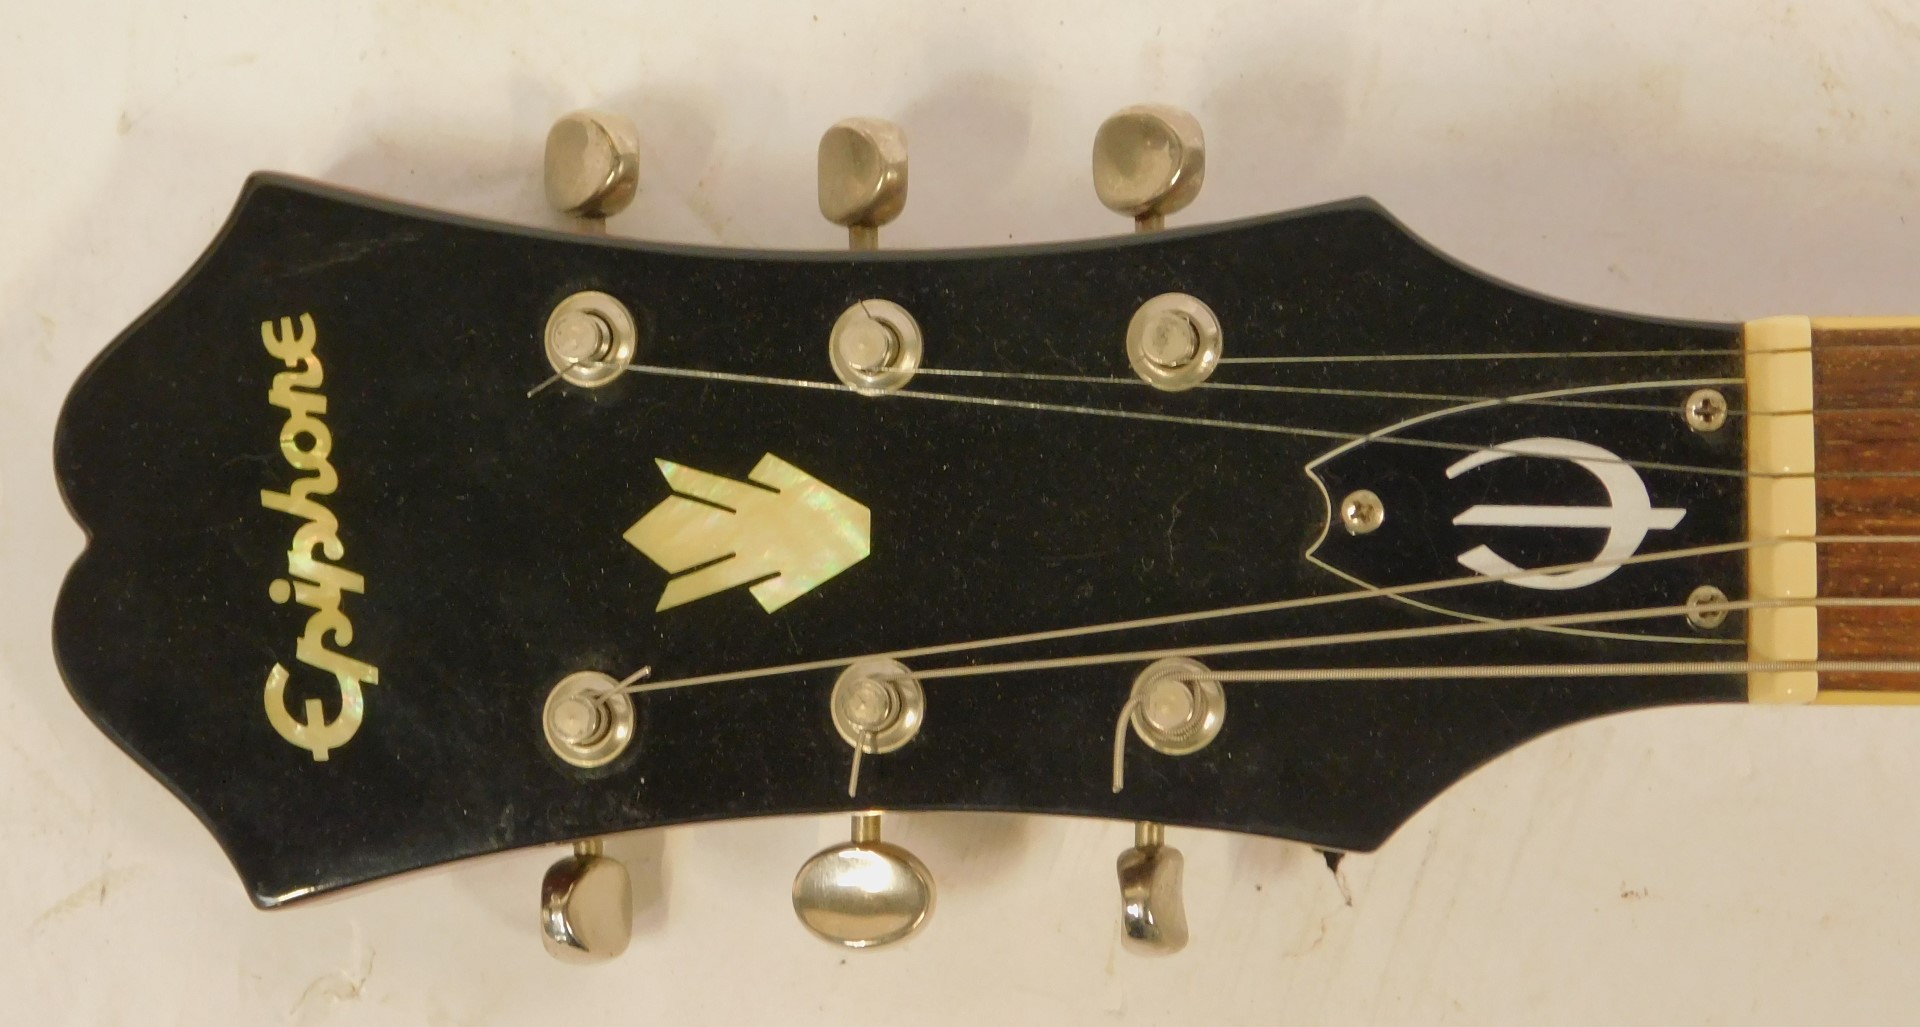 An Epiphone Riviera P93 MG electric guitar, serial number 11021502198, the body in gold coloured - Image 4 of 13